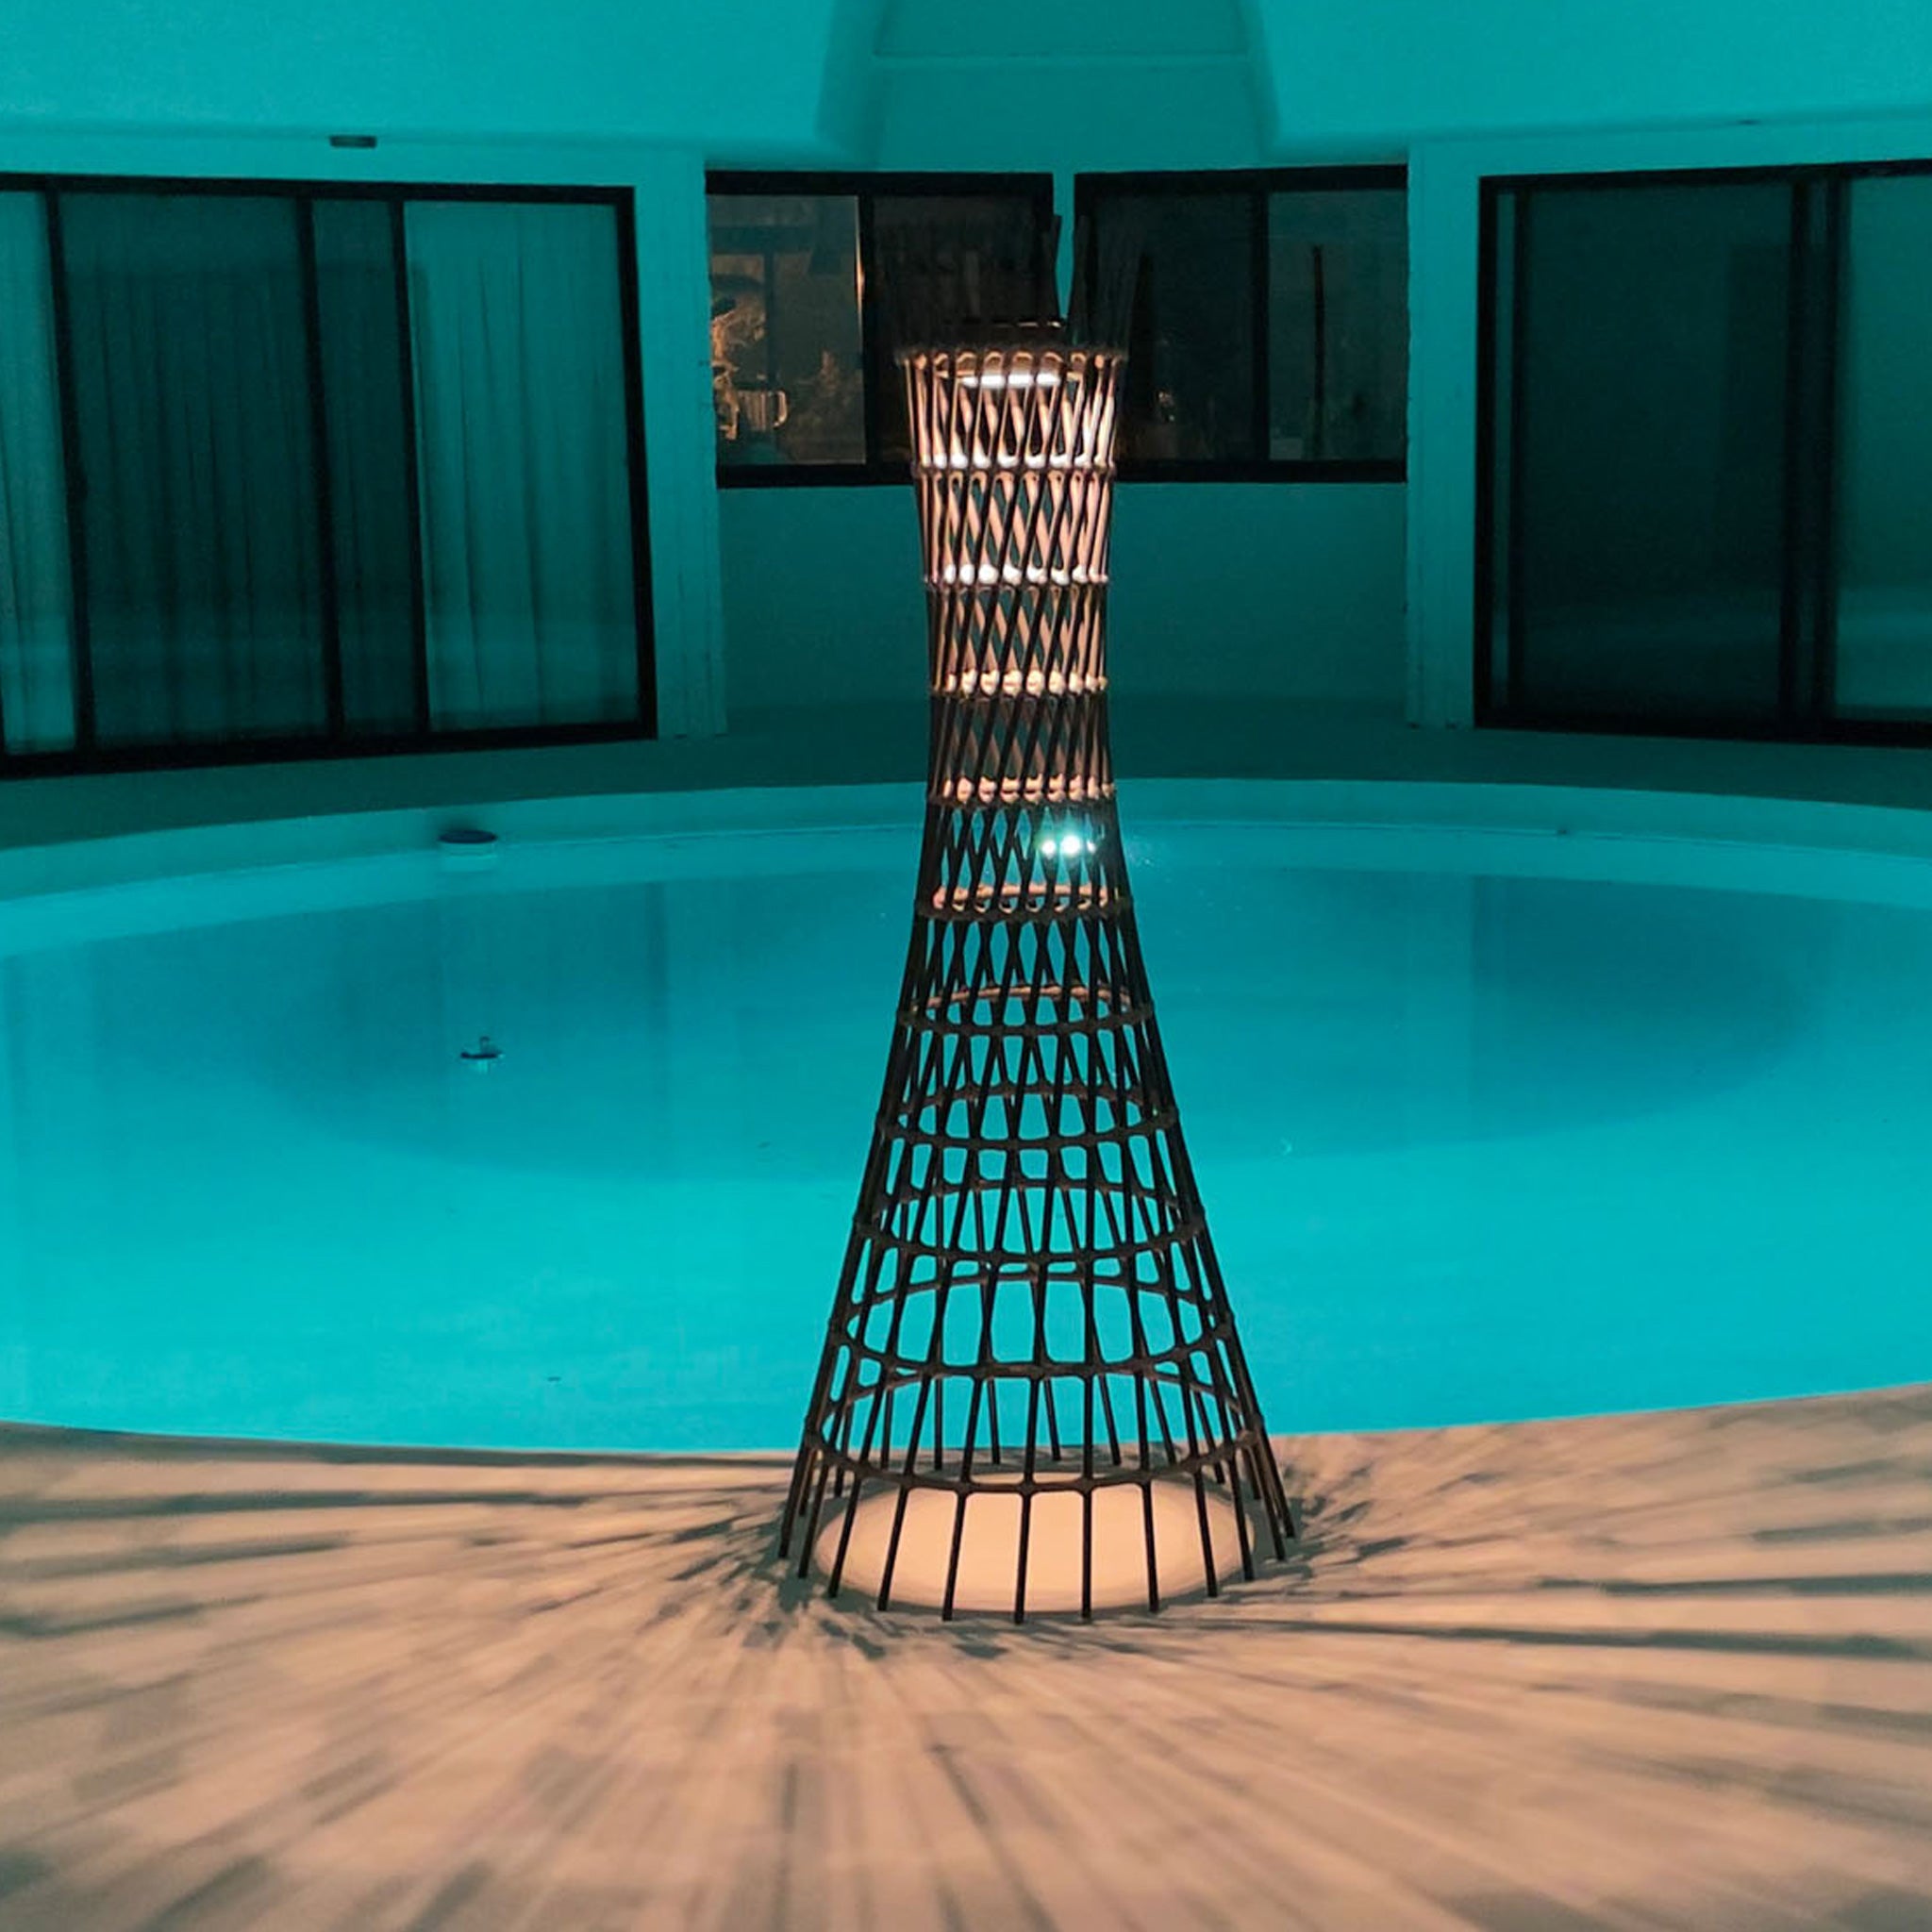 wharf floor lamp by the pool light up surronding